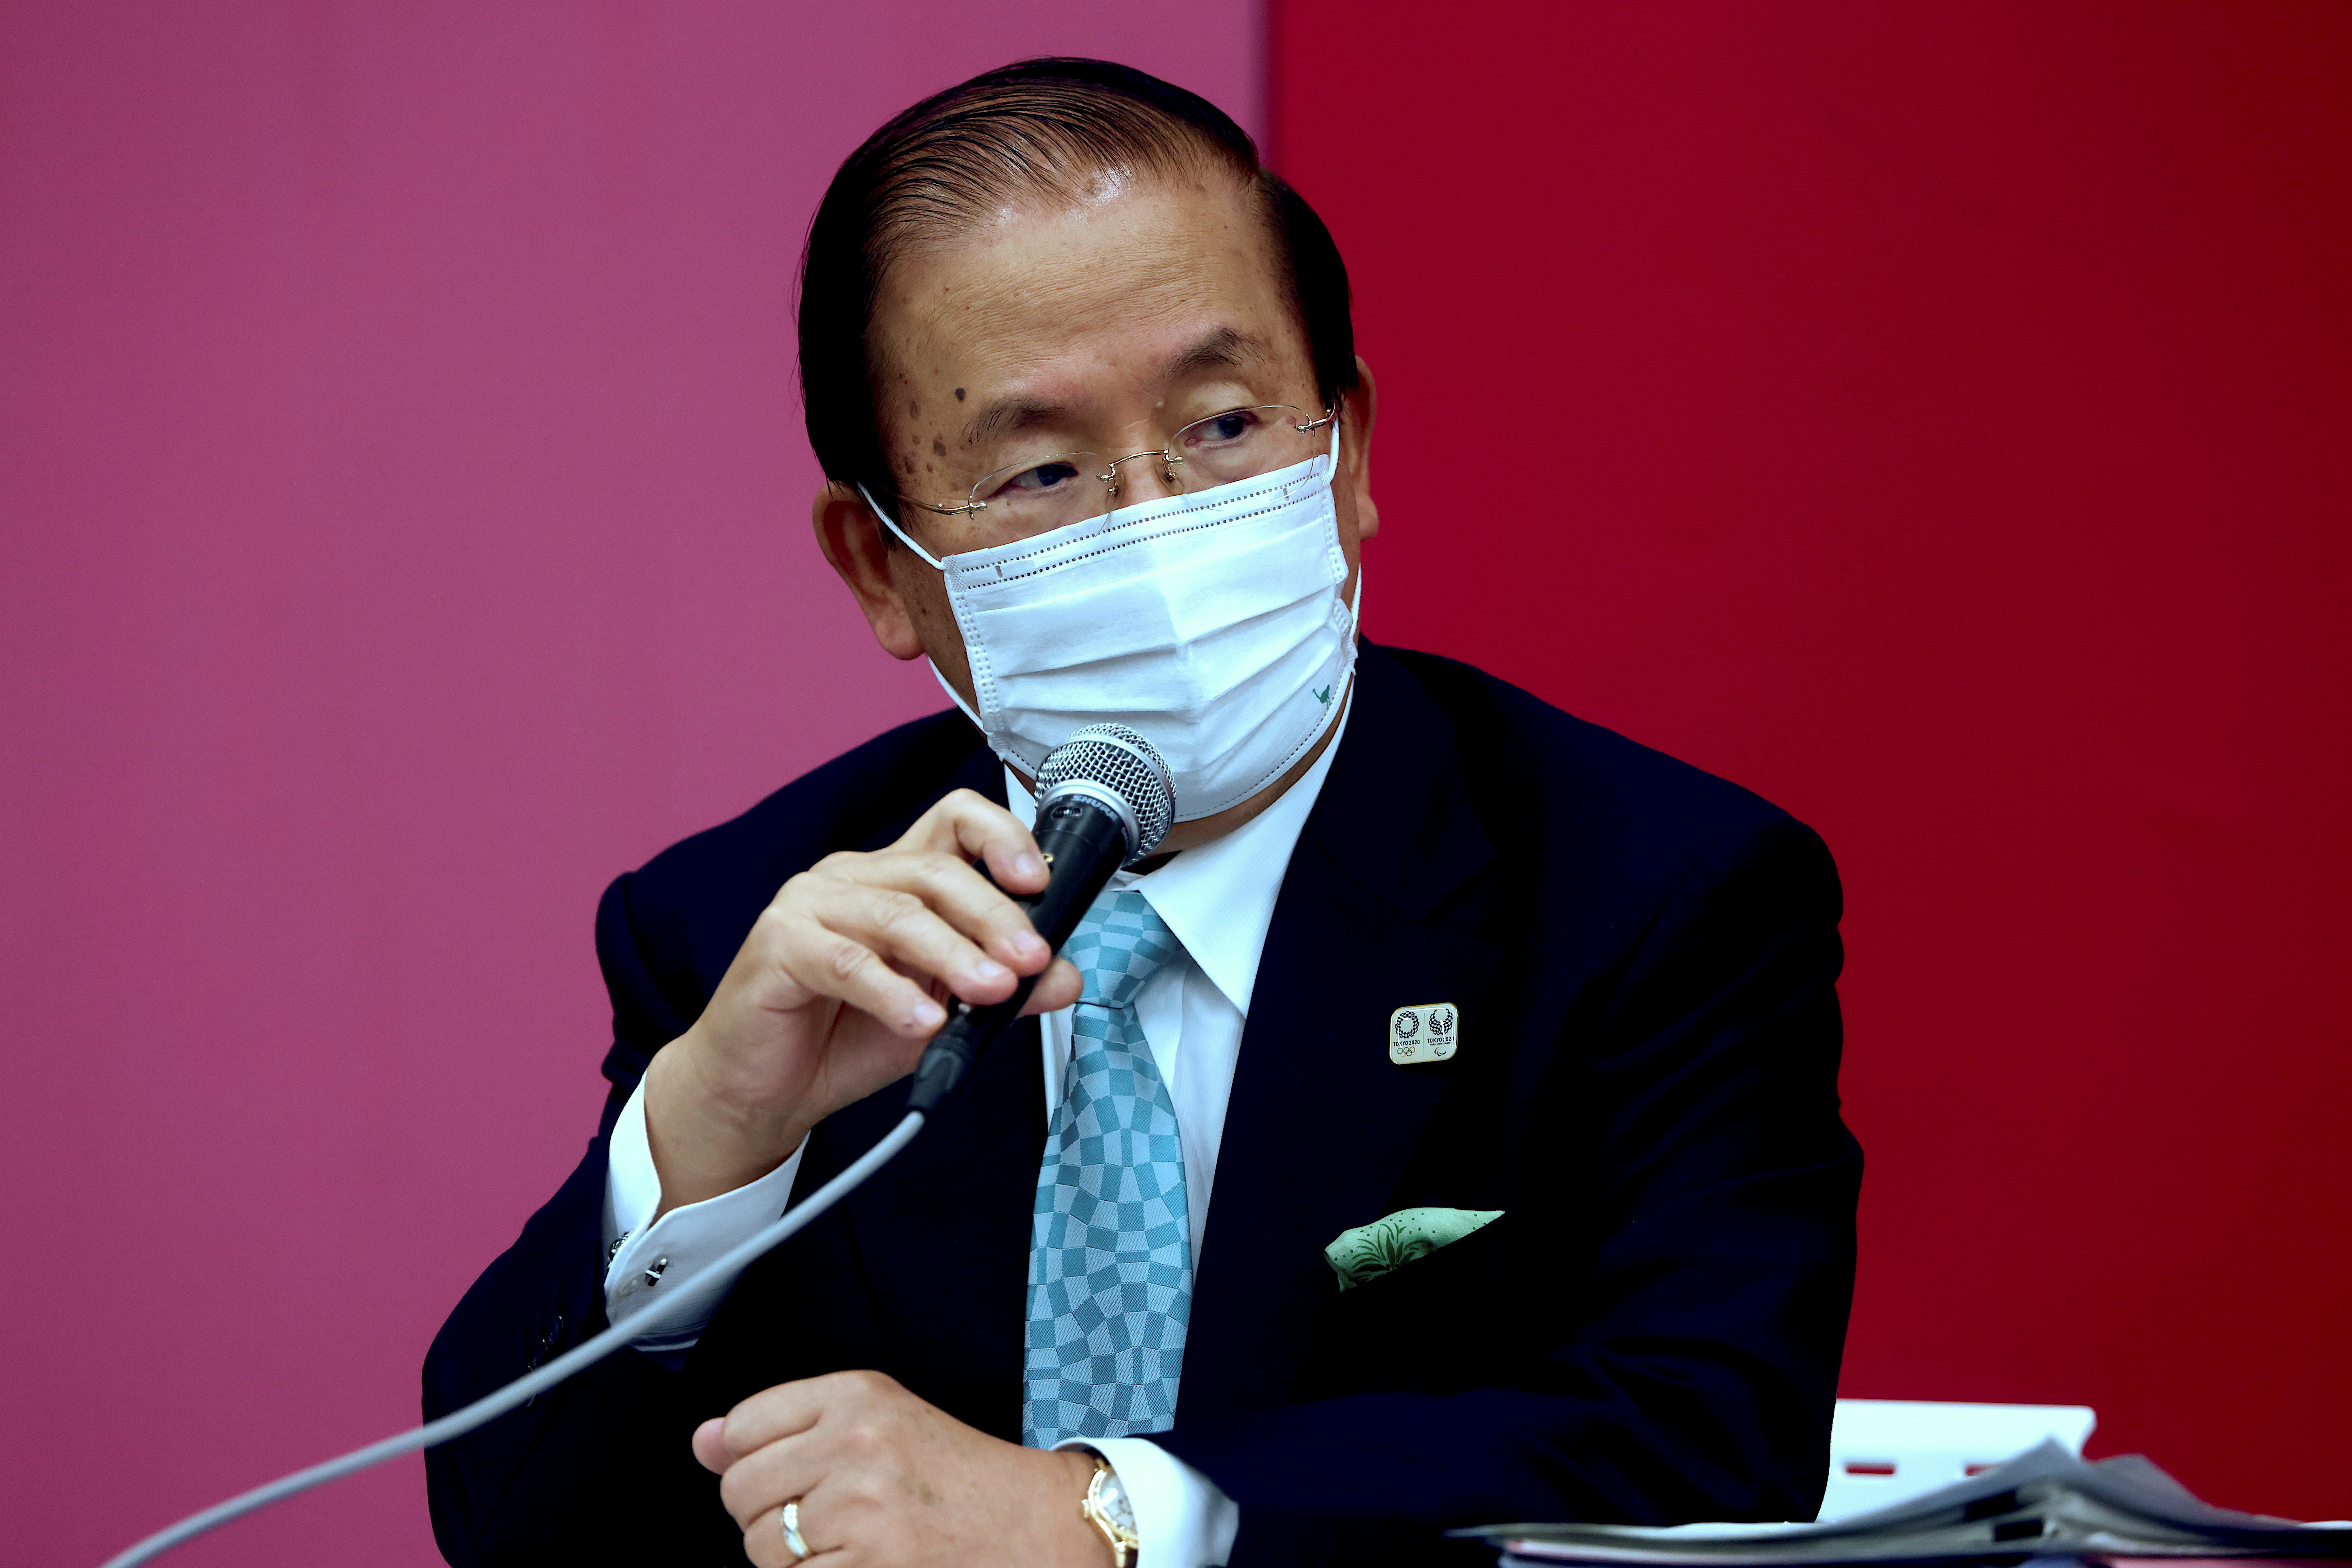 Tokyo 2020 CEO Toshiro Muto speaks during a press conference in Tokyo